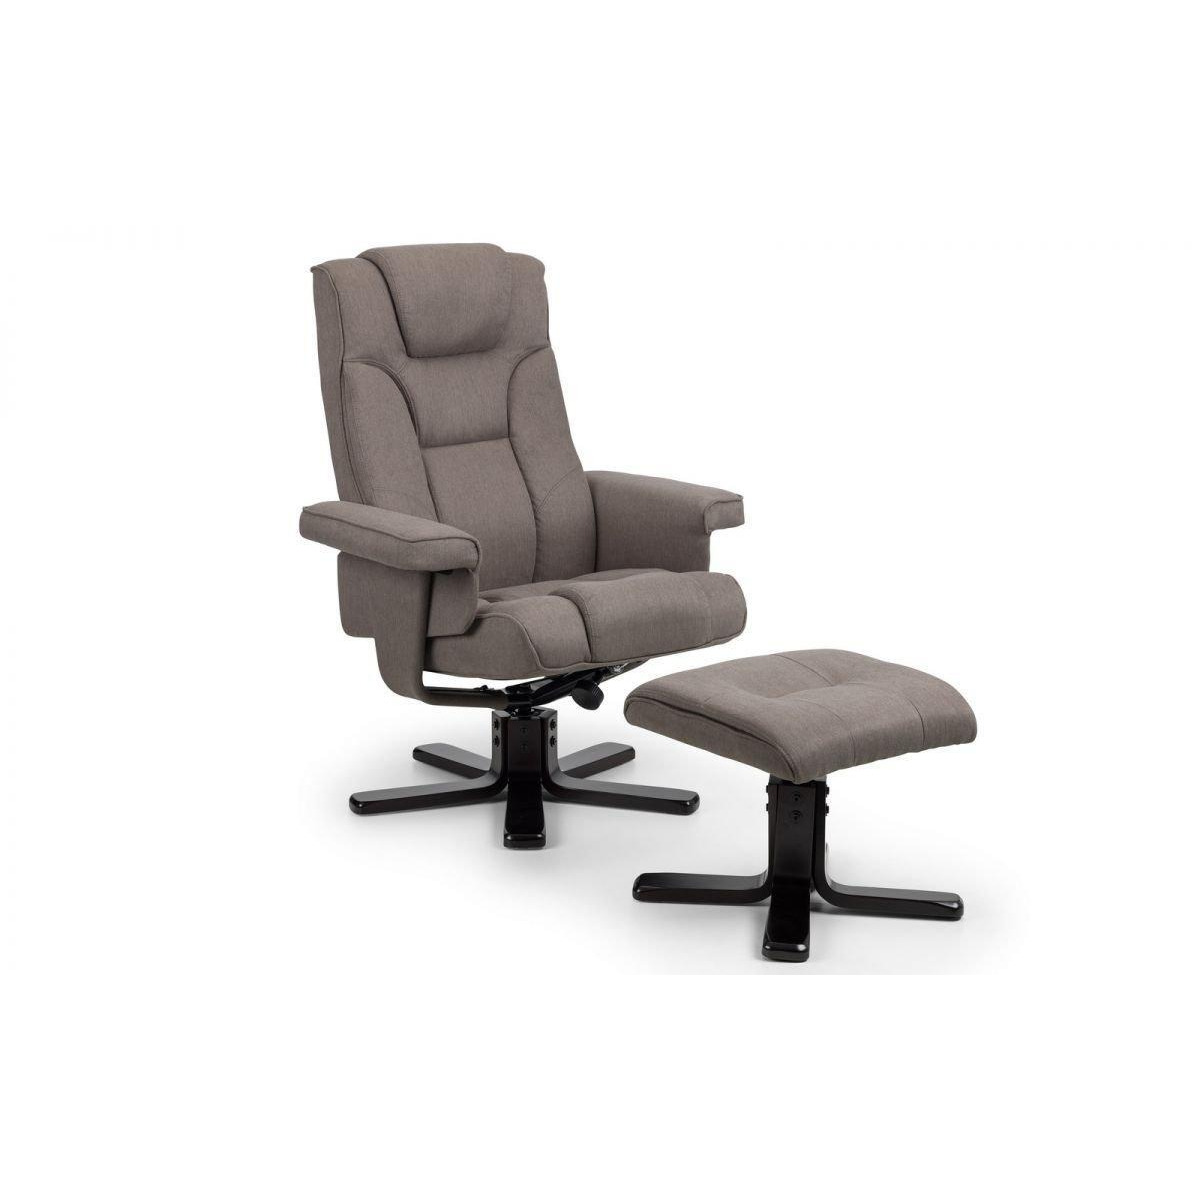 Reclining Swivel Chair with Footstool - image 1